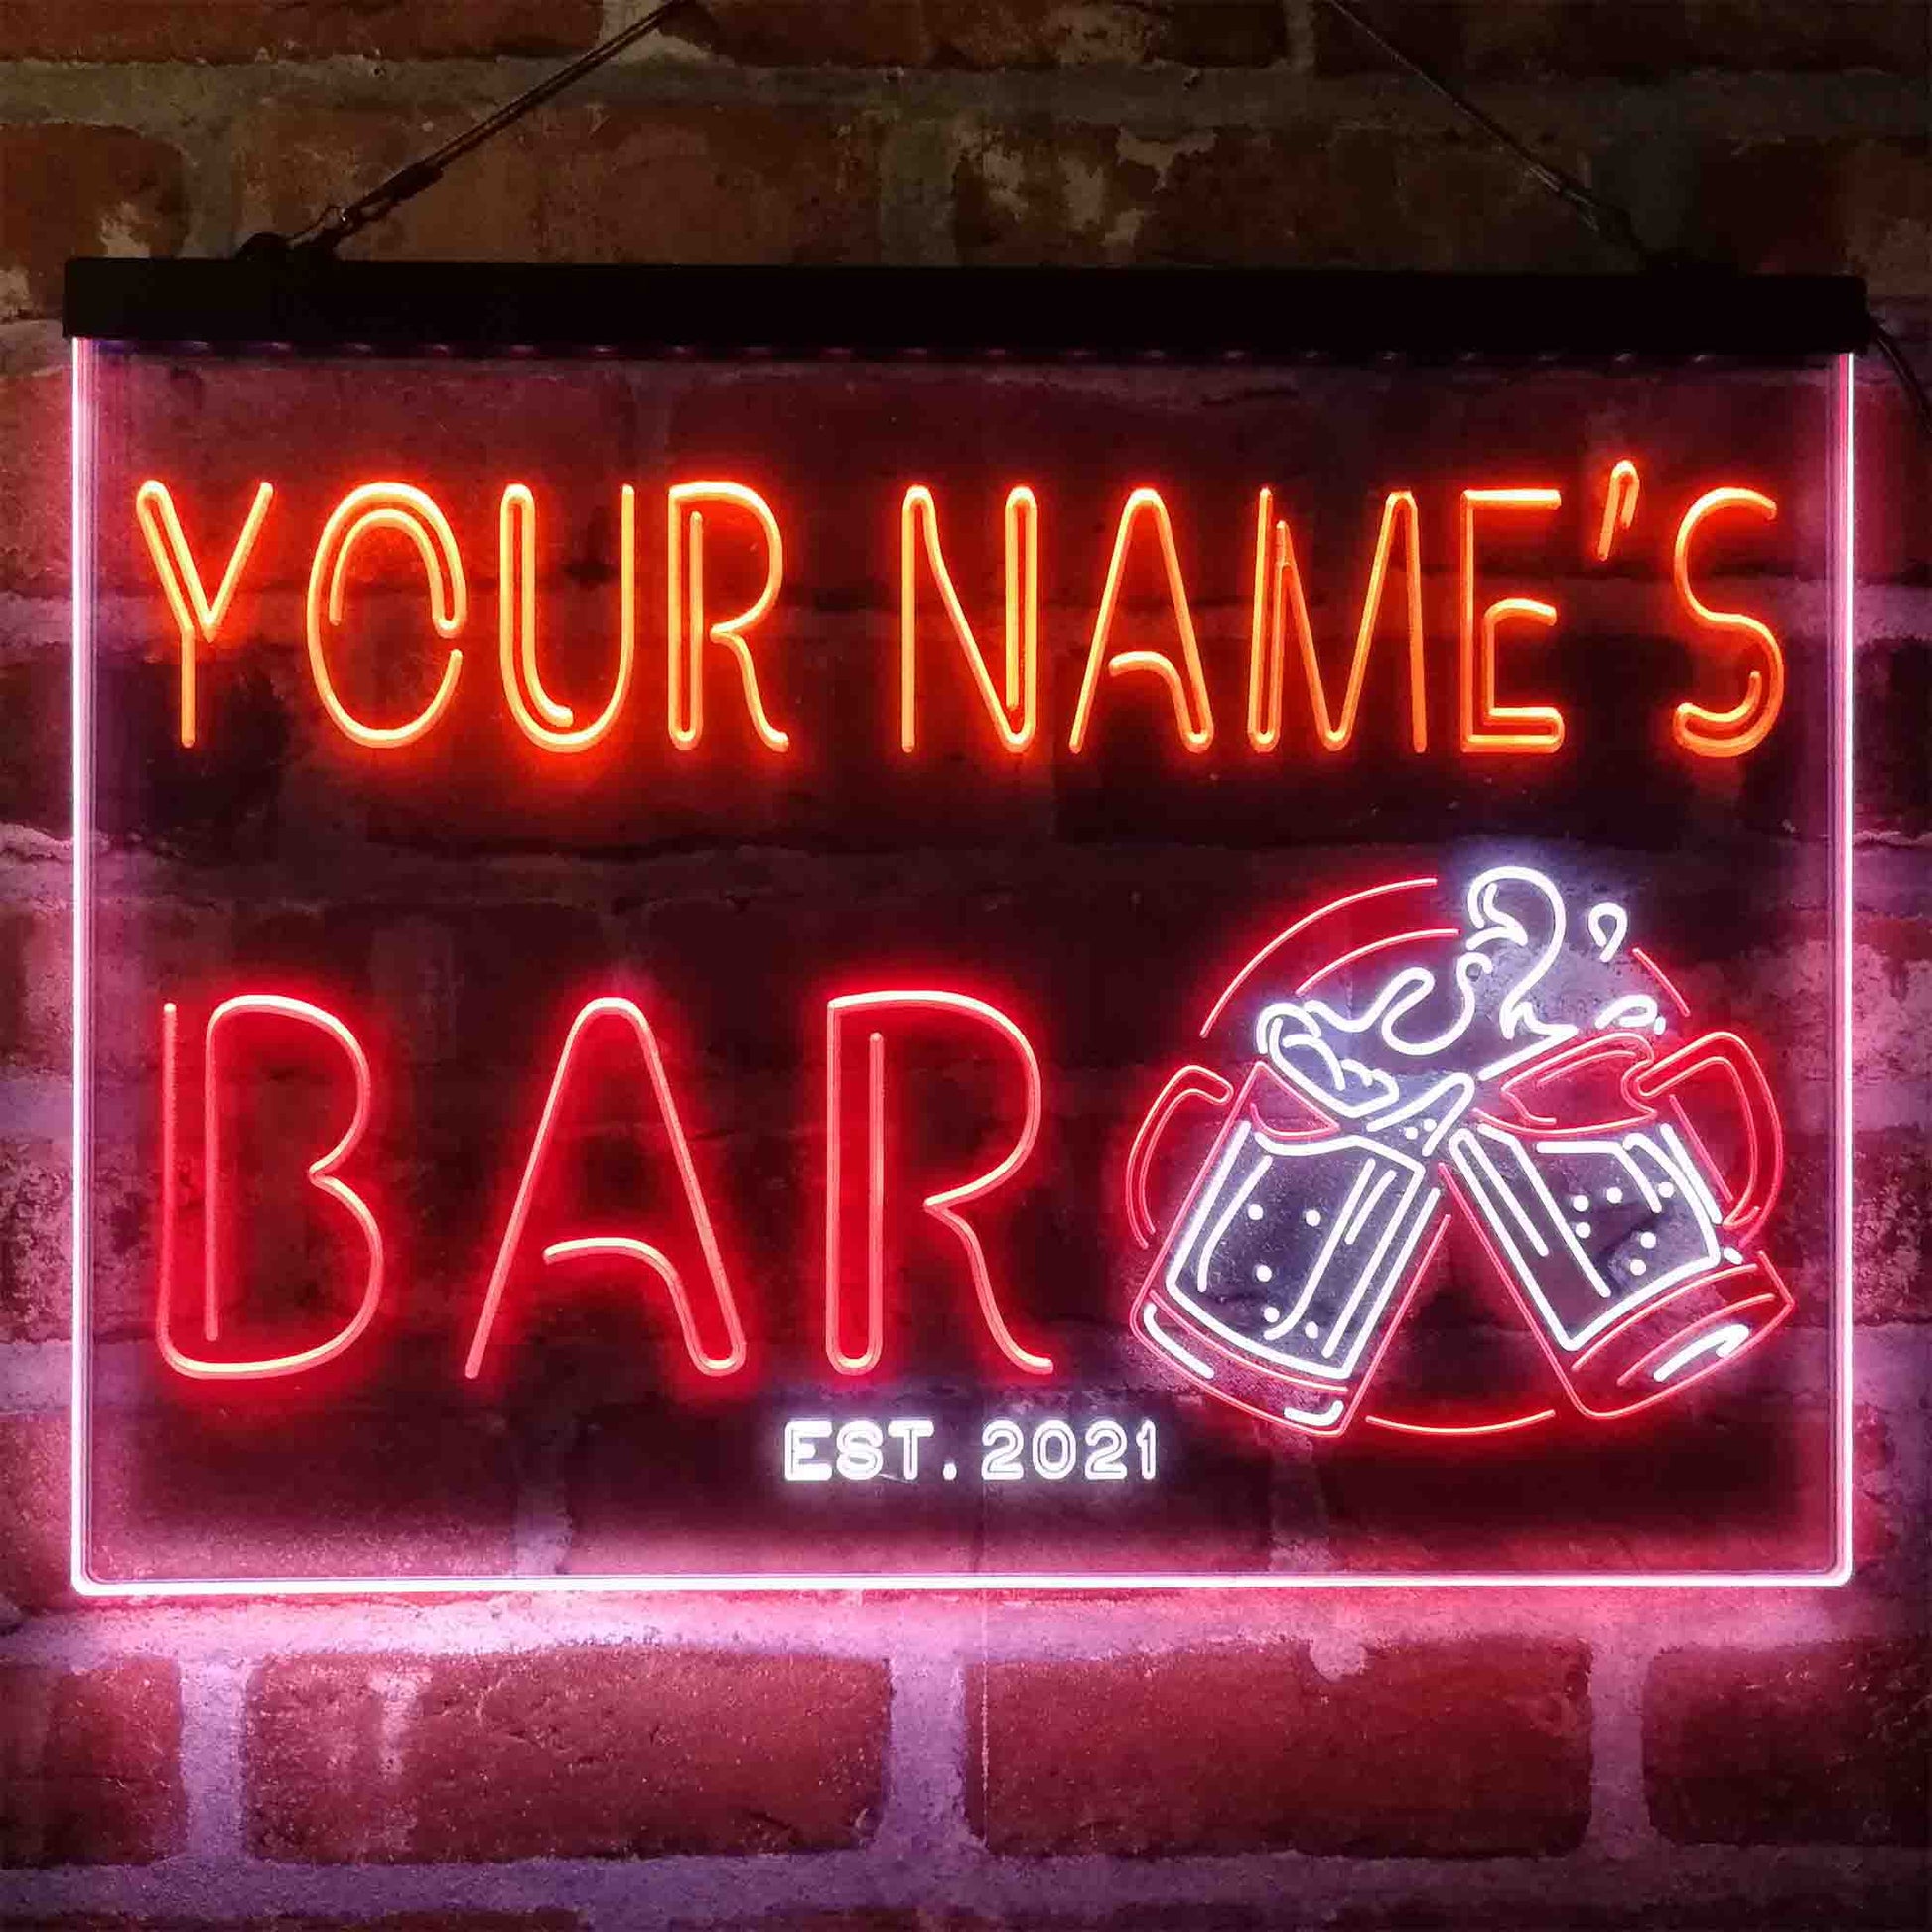 Personalized Beer Mug Deco 3-Color LED Neon Light Sign - Way Up Gifts